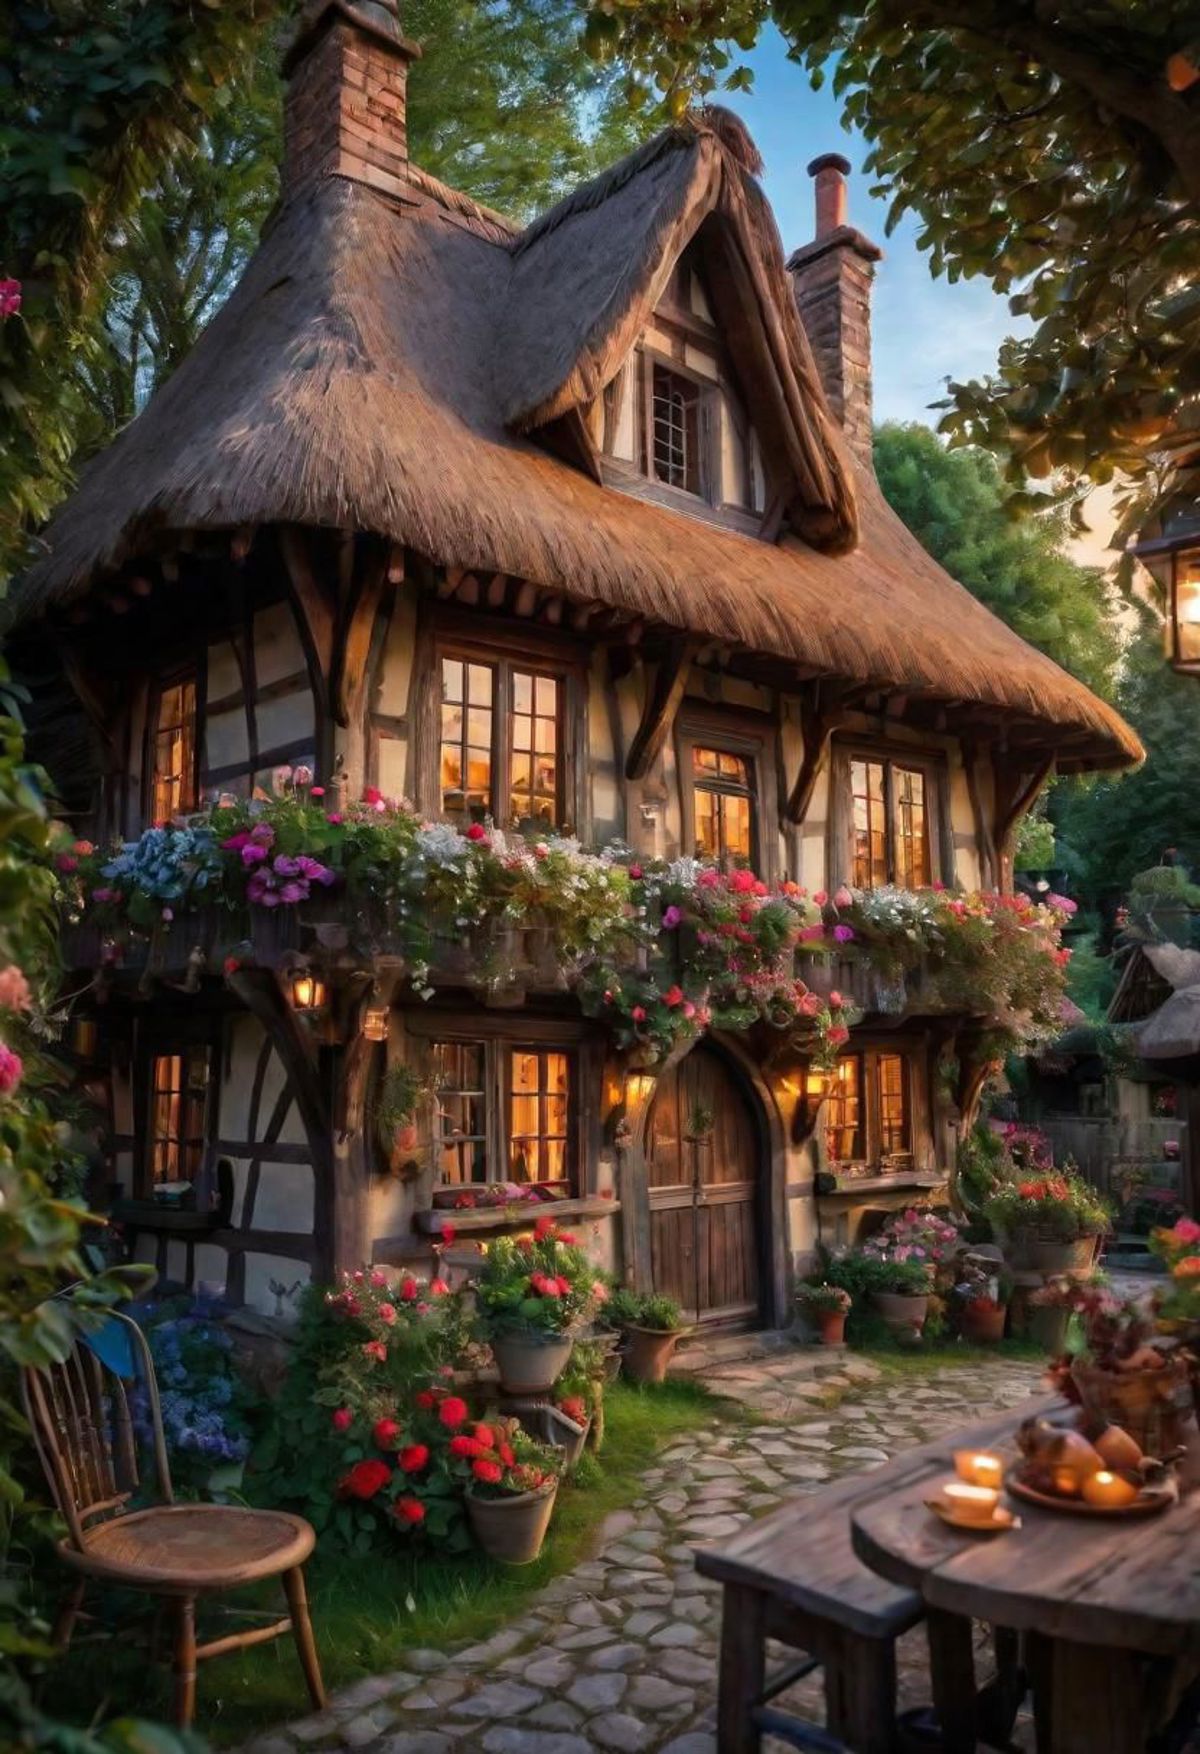 A charming, flower-adorned cottage with a thatched roof.